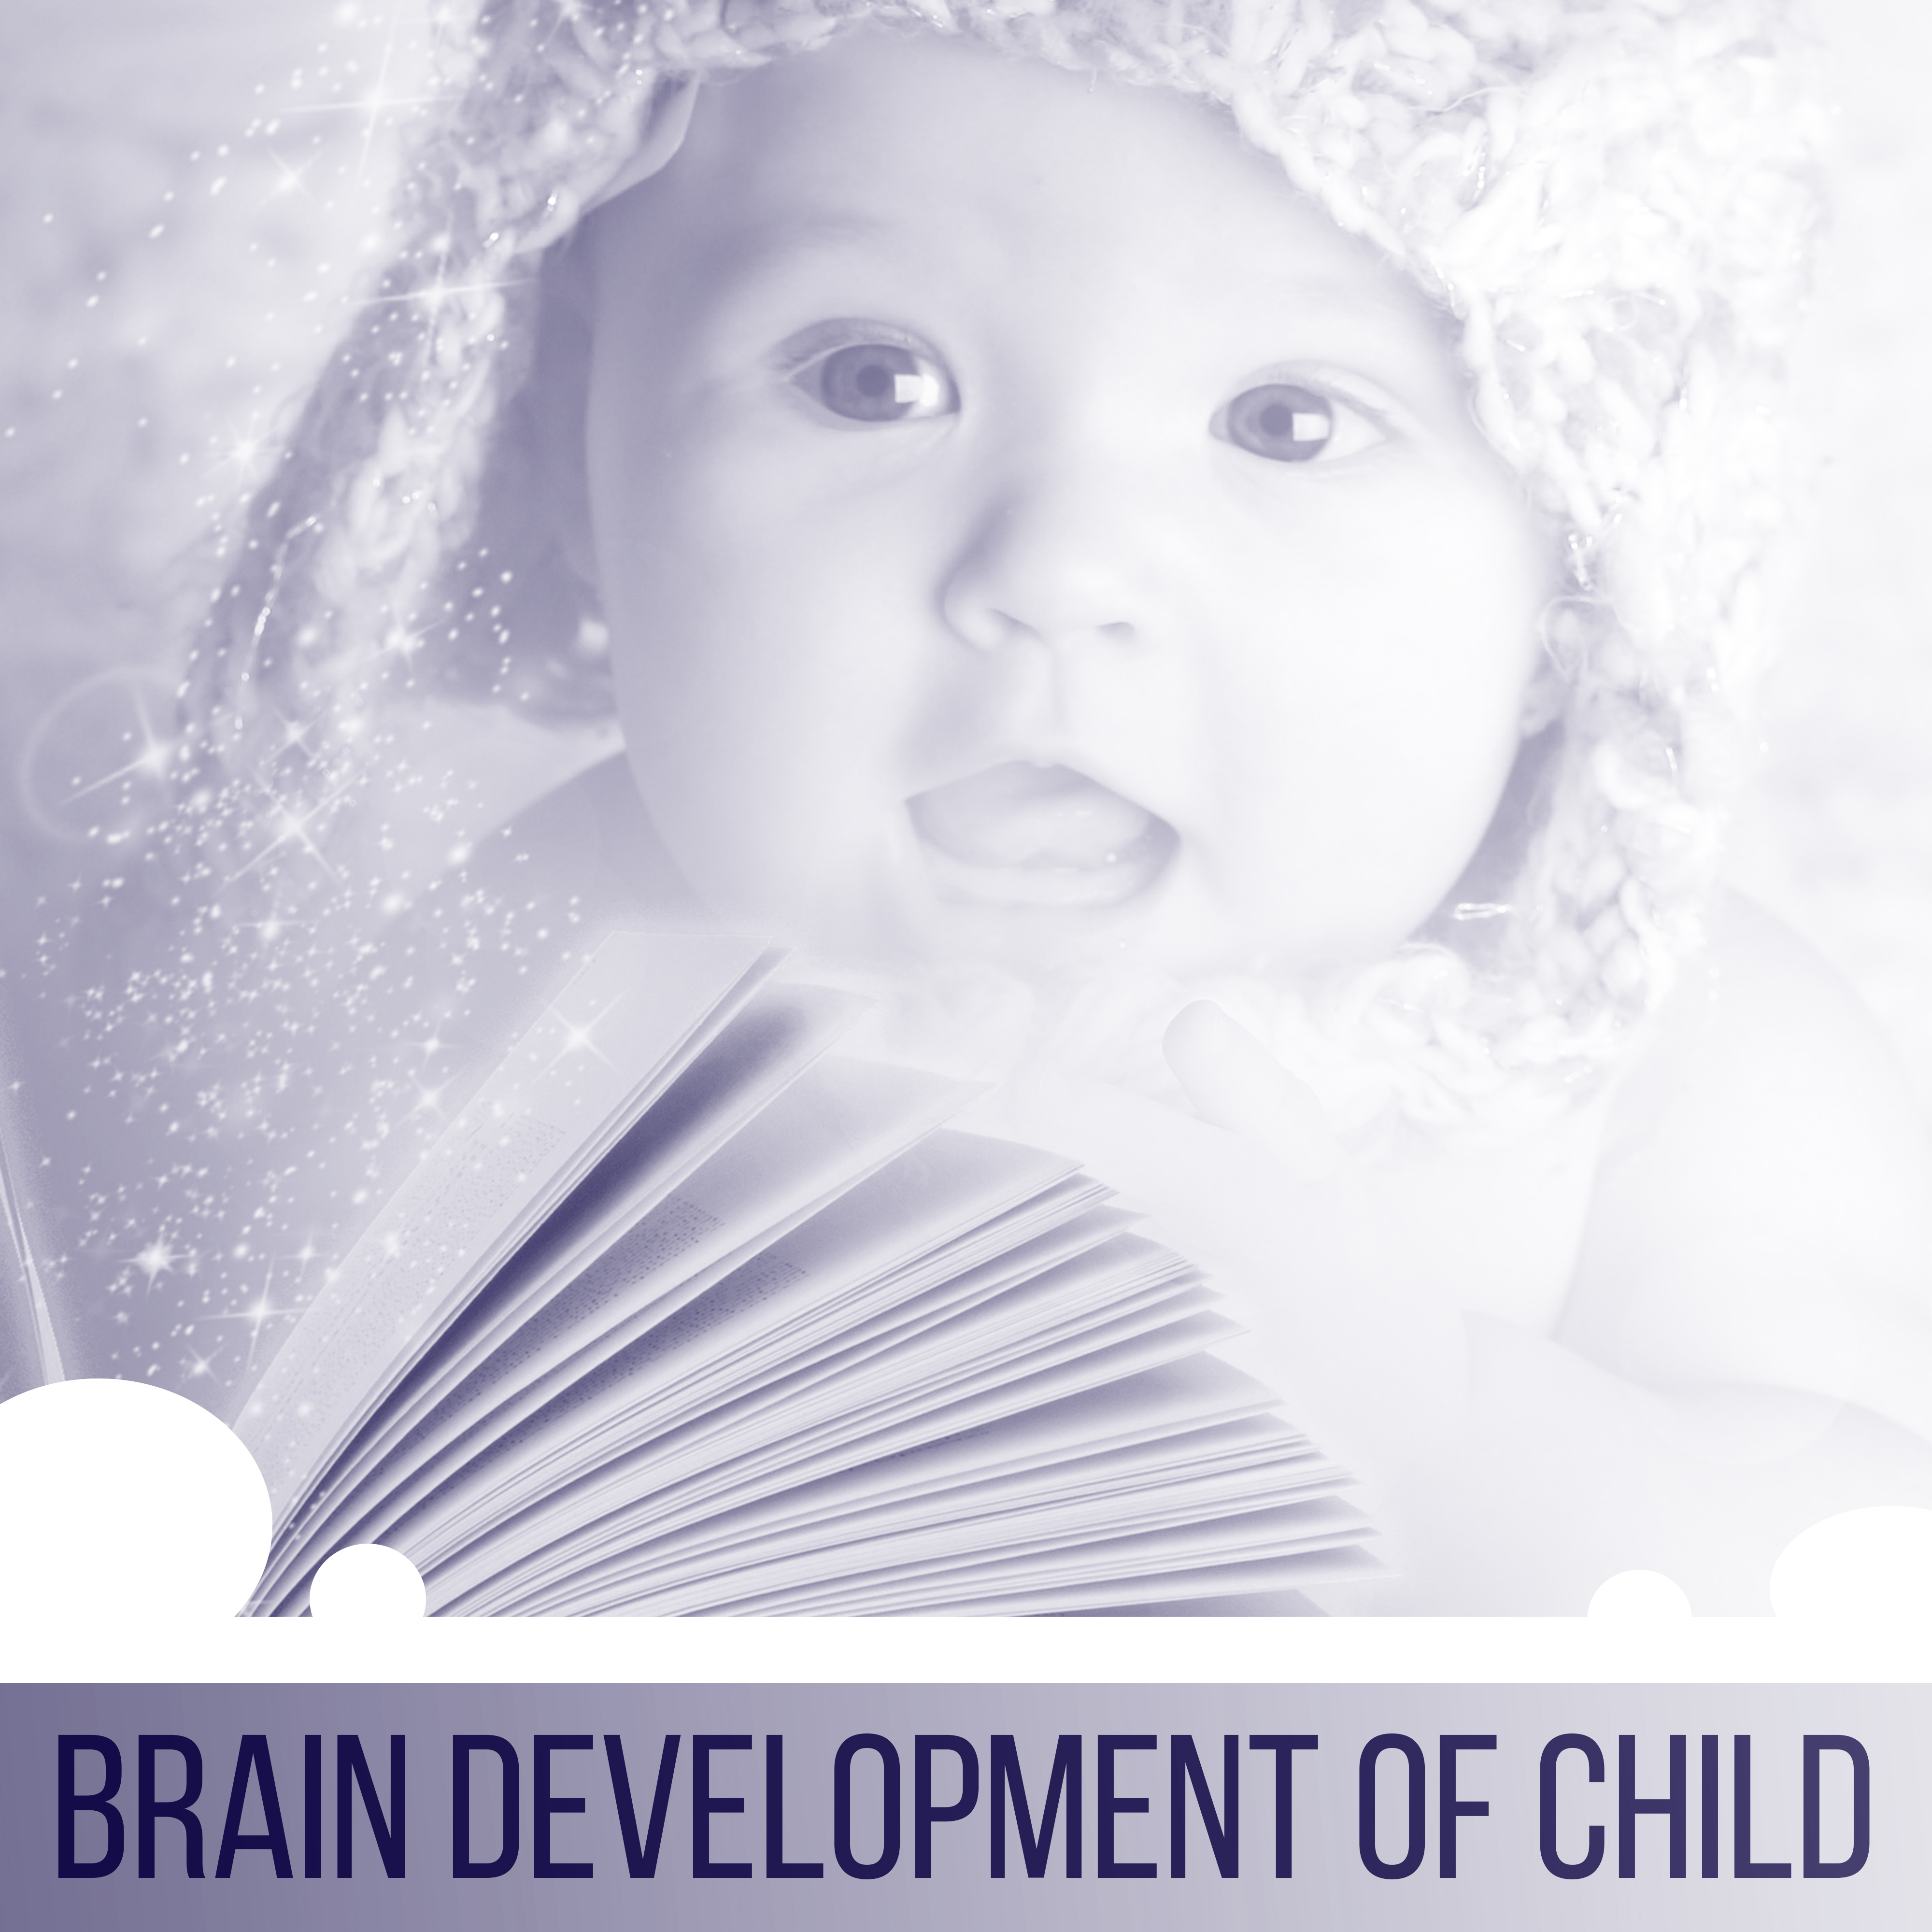 Brain Development of Child  Educational Melodies for Children, Brain Power, Build Baby IQ, Classical Music for Youngest, Mozart, Bach